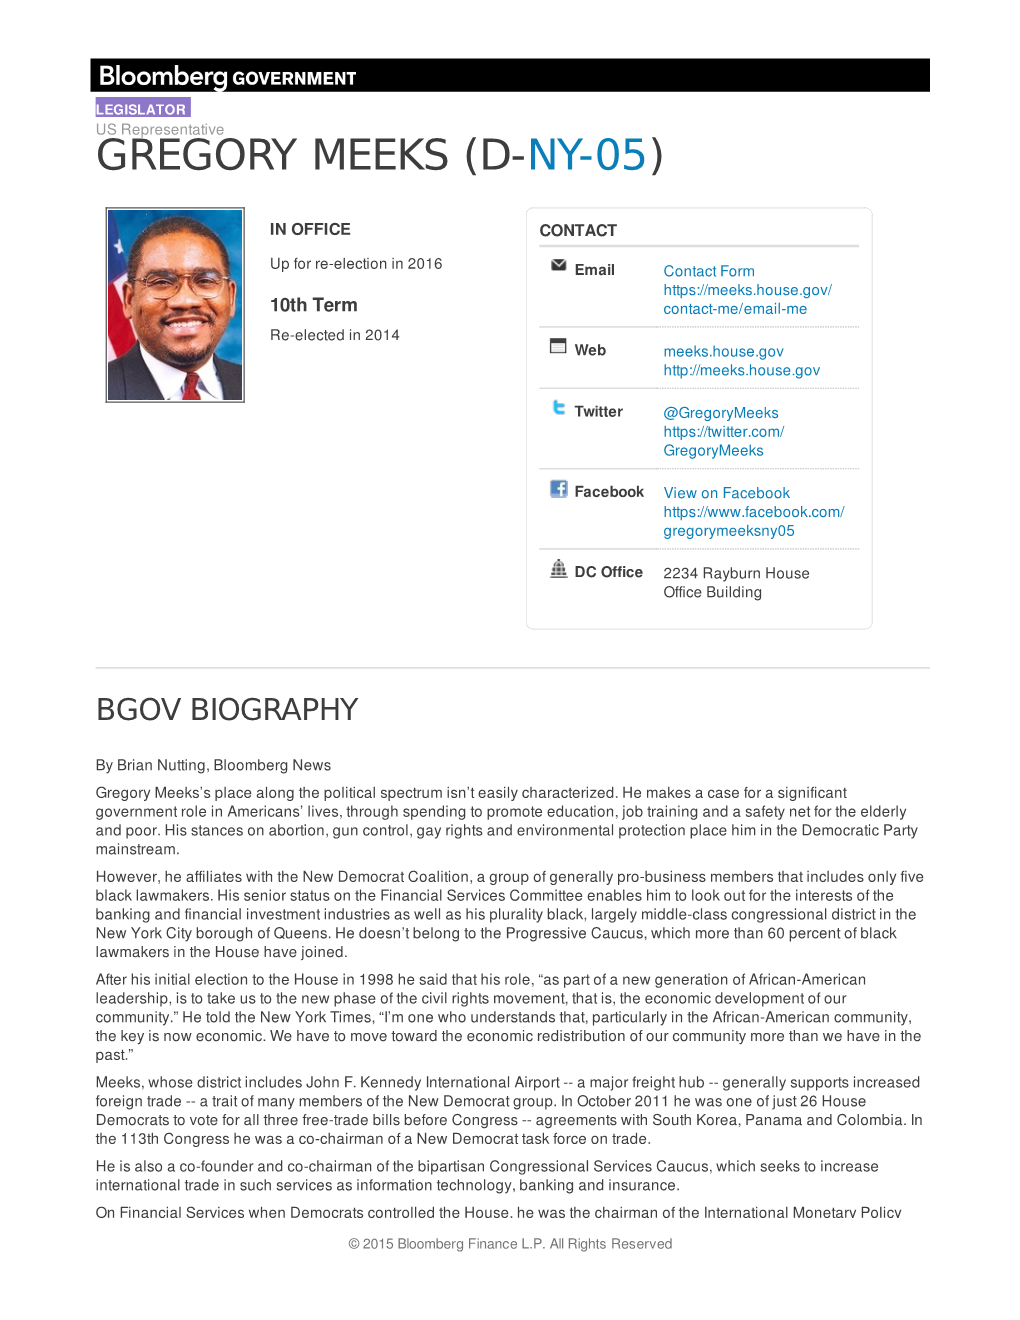 Gregory Meeks (D-Ny-05)